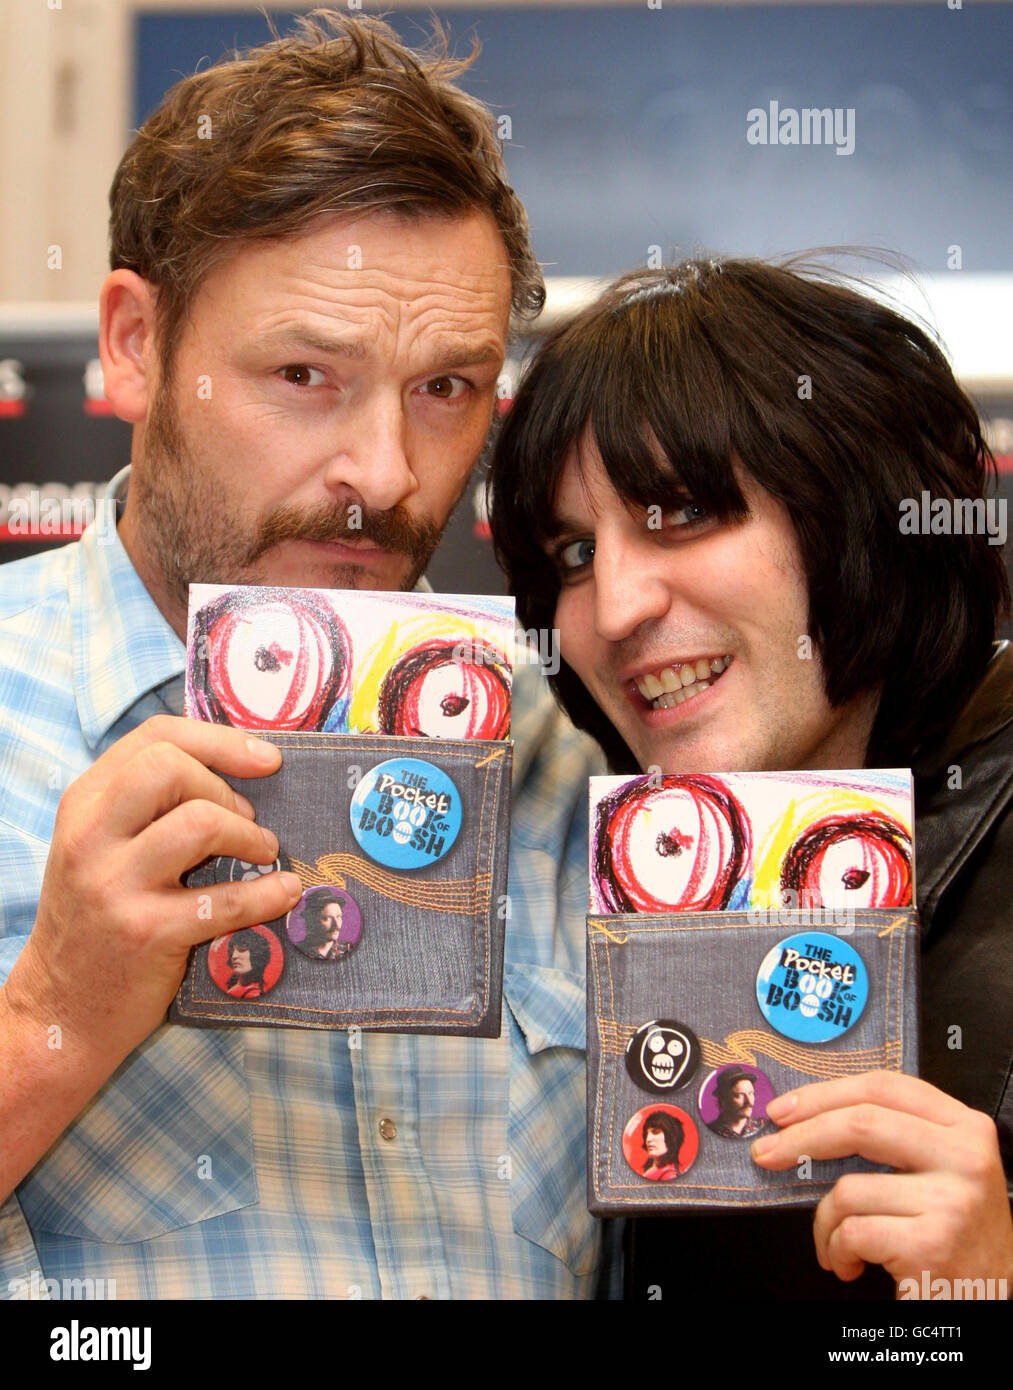 Comedy duo The Mighty Boosh, Julian Barratt (left) and Noel Fielding (right) during a signing session for their book The Pocket Book of Boosh at Borders Books in Glasgow. Stock Photo